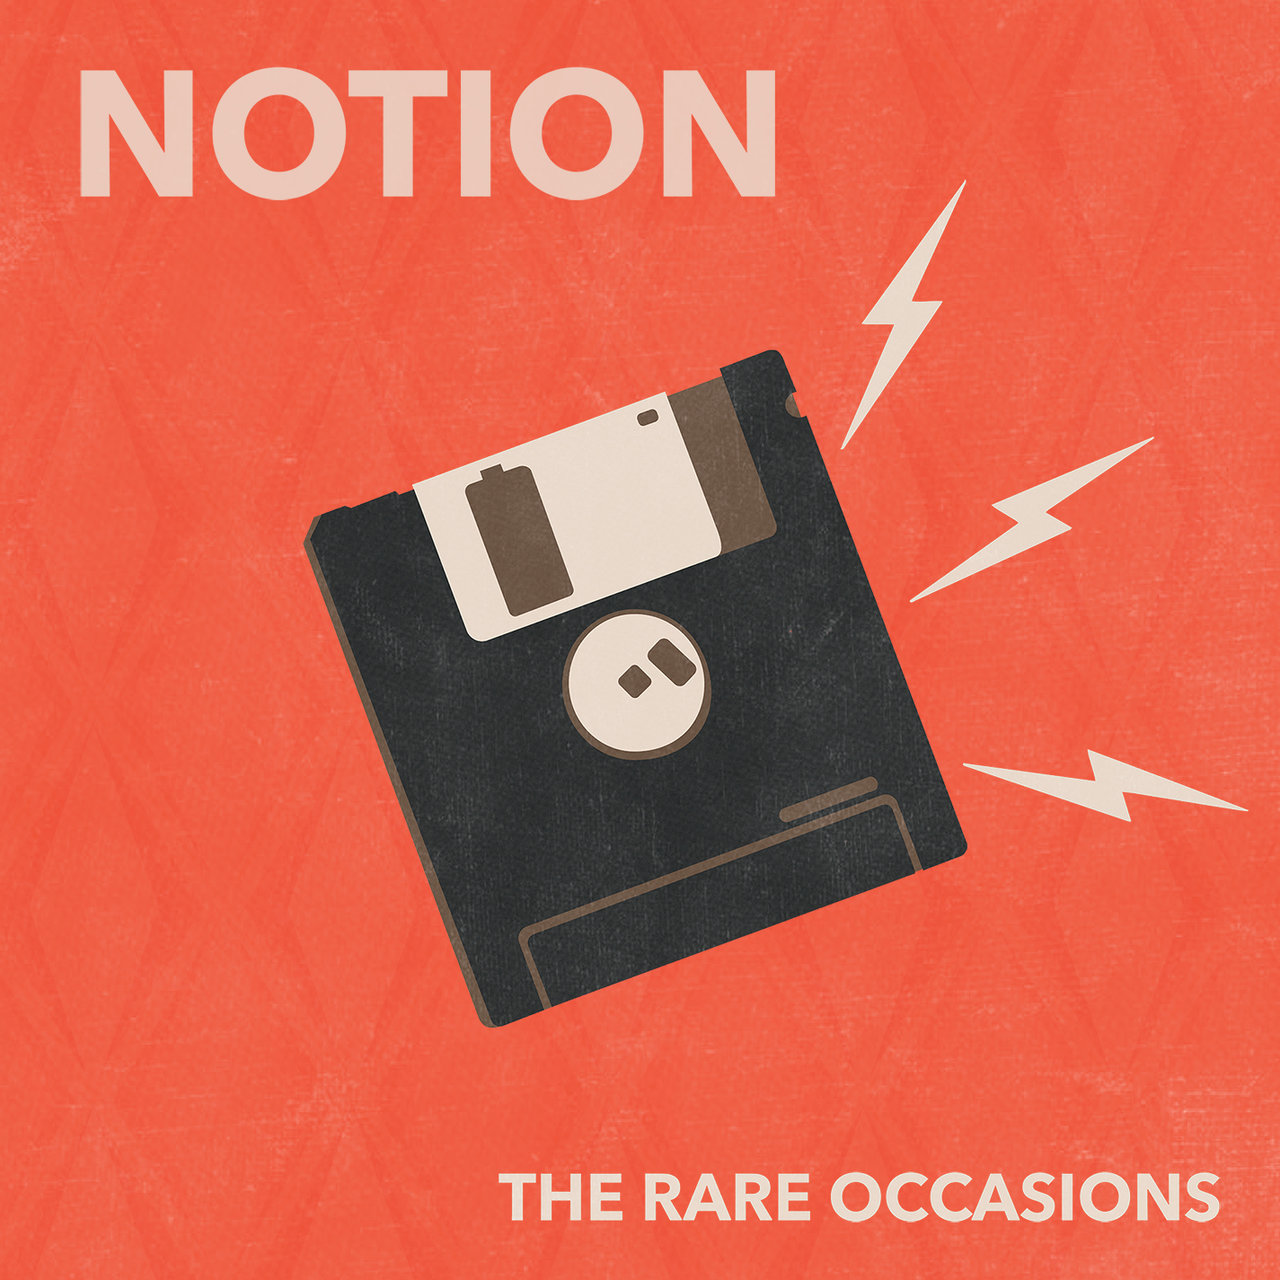 The Rare Occasions Notion cover artwork